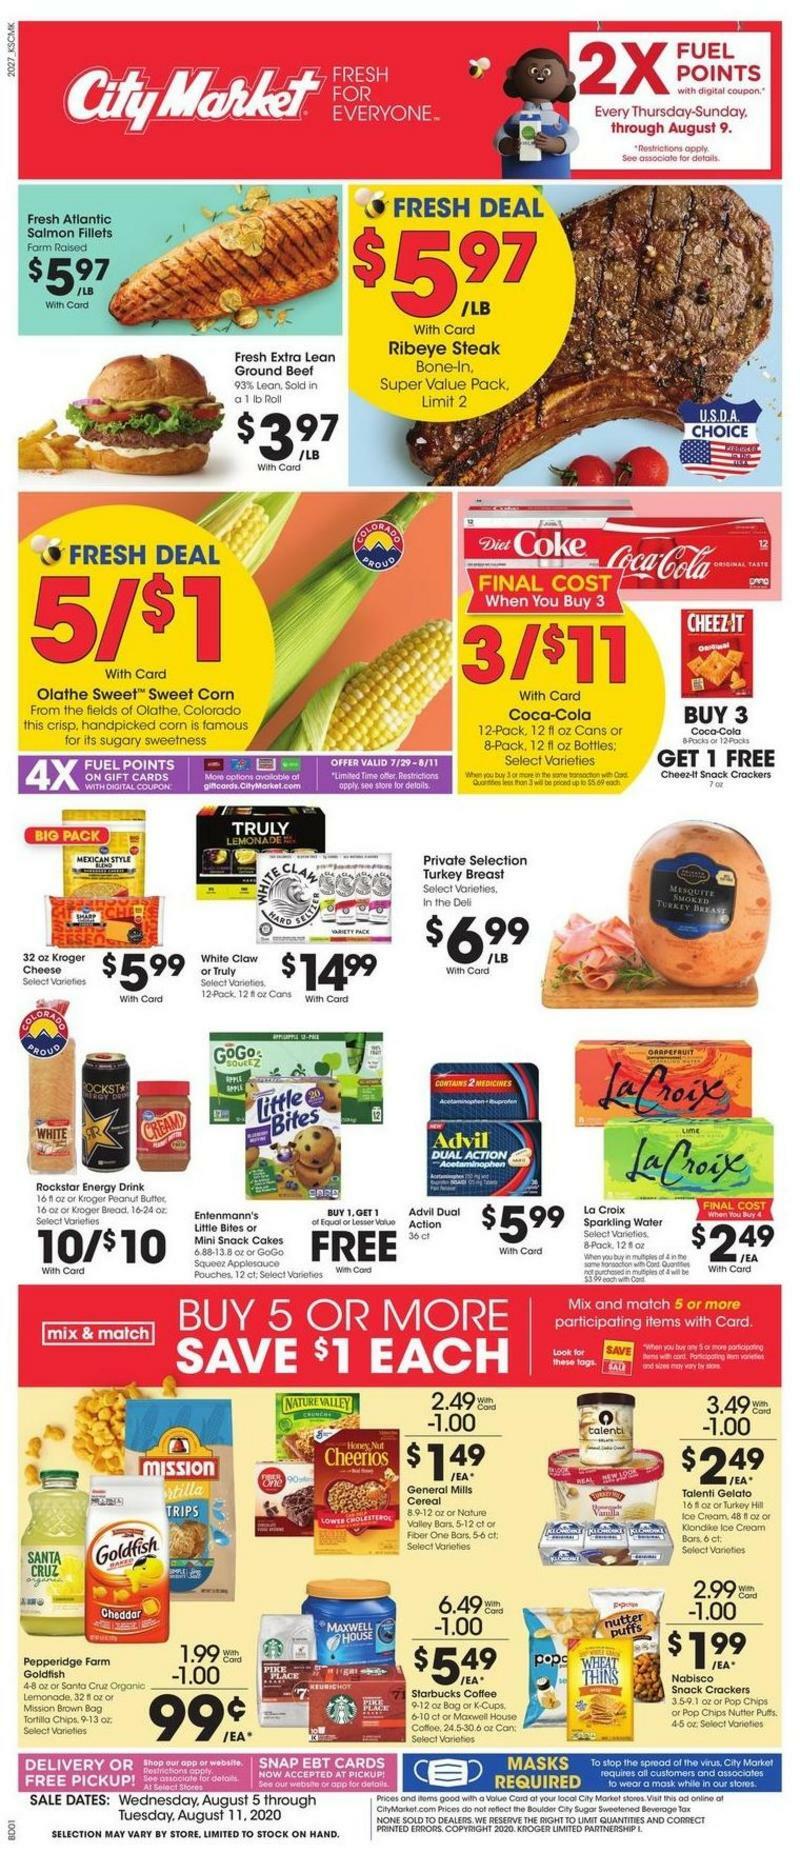 City Market Weekly Ads & Special Buys from August 5